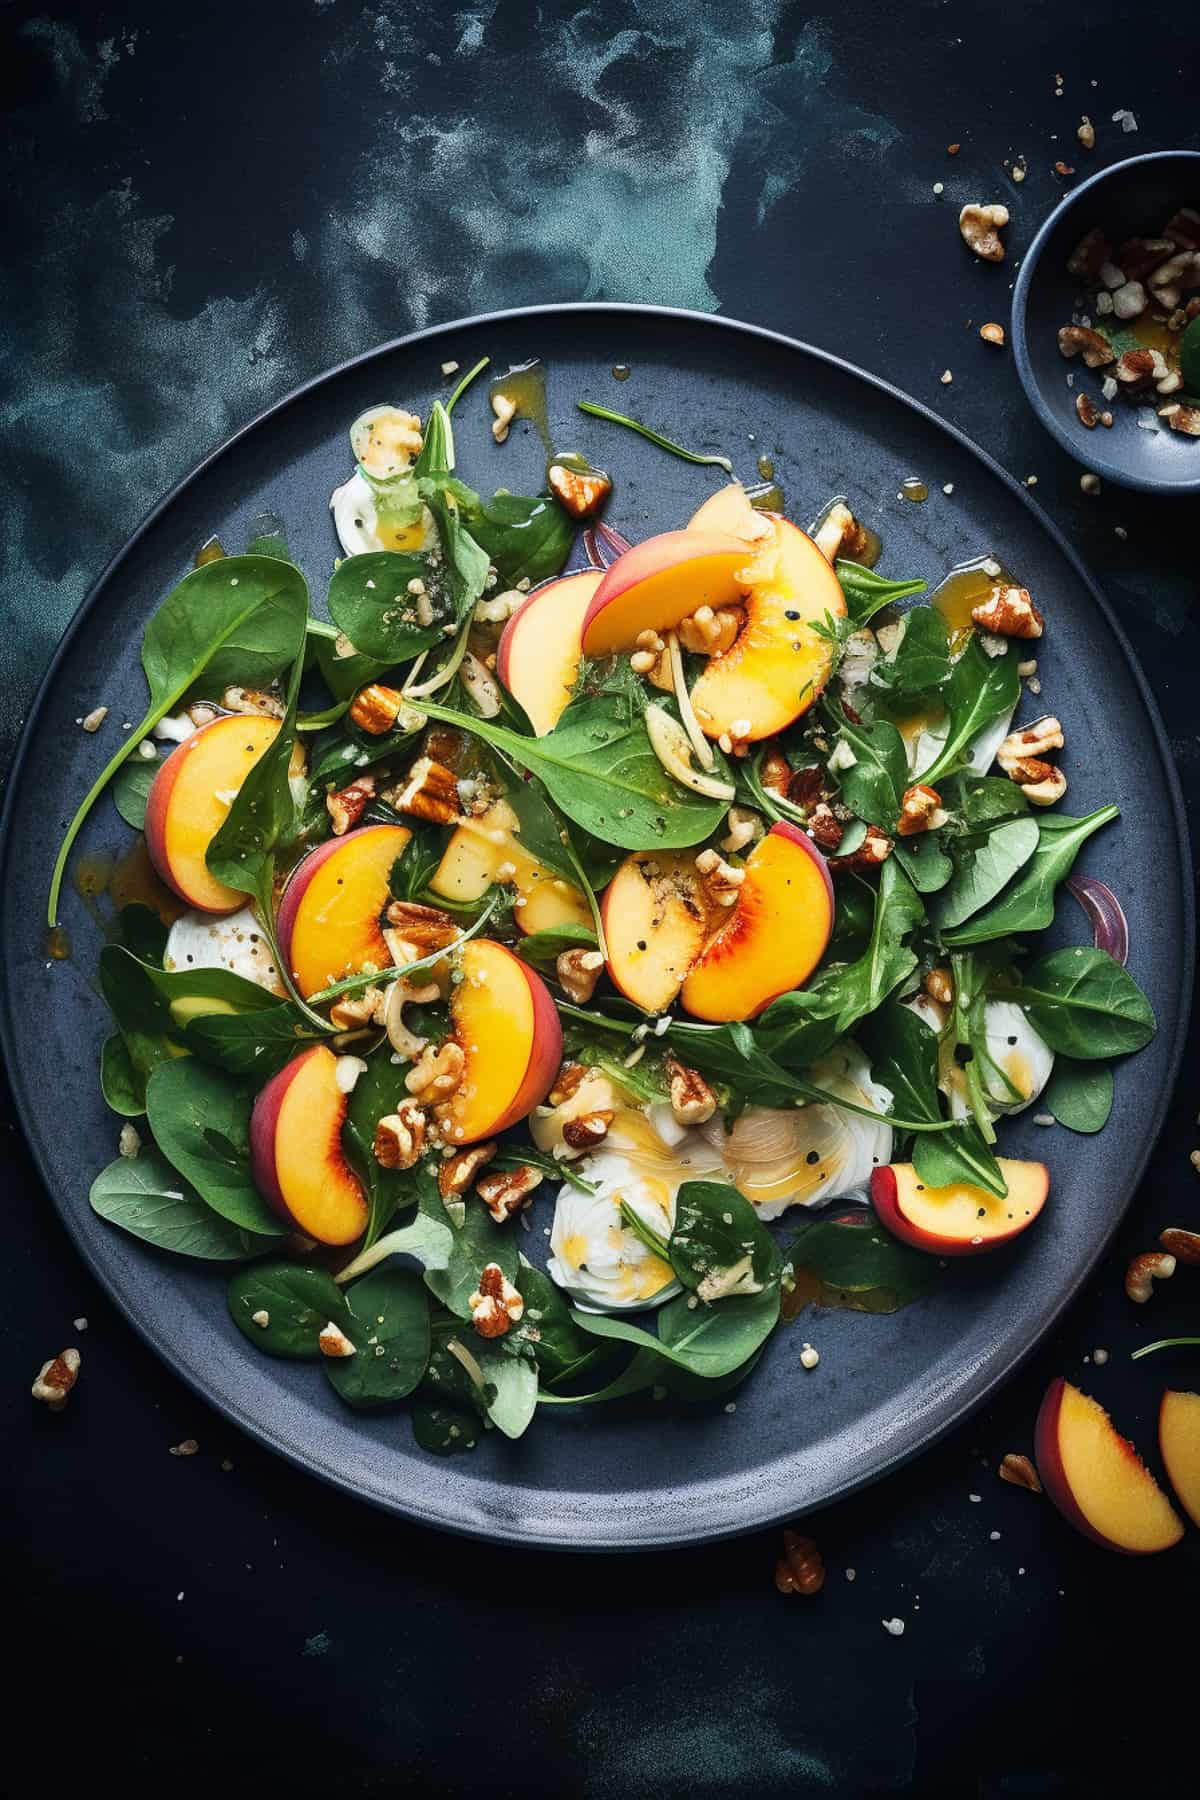 Peach salad with spinach and almonds.